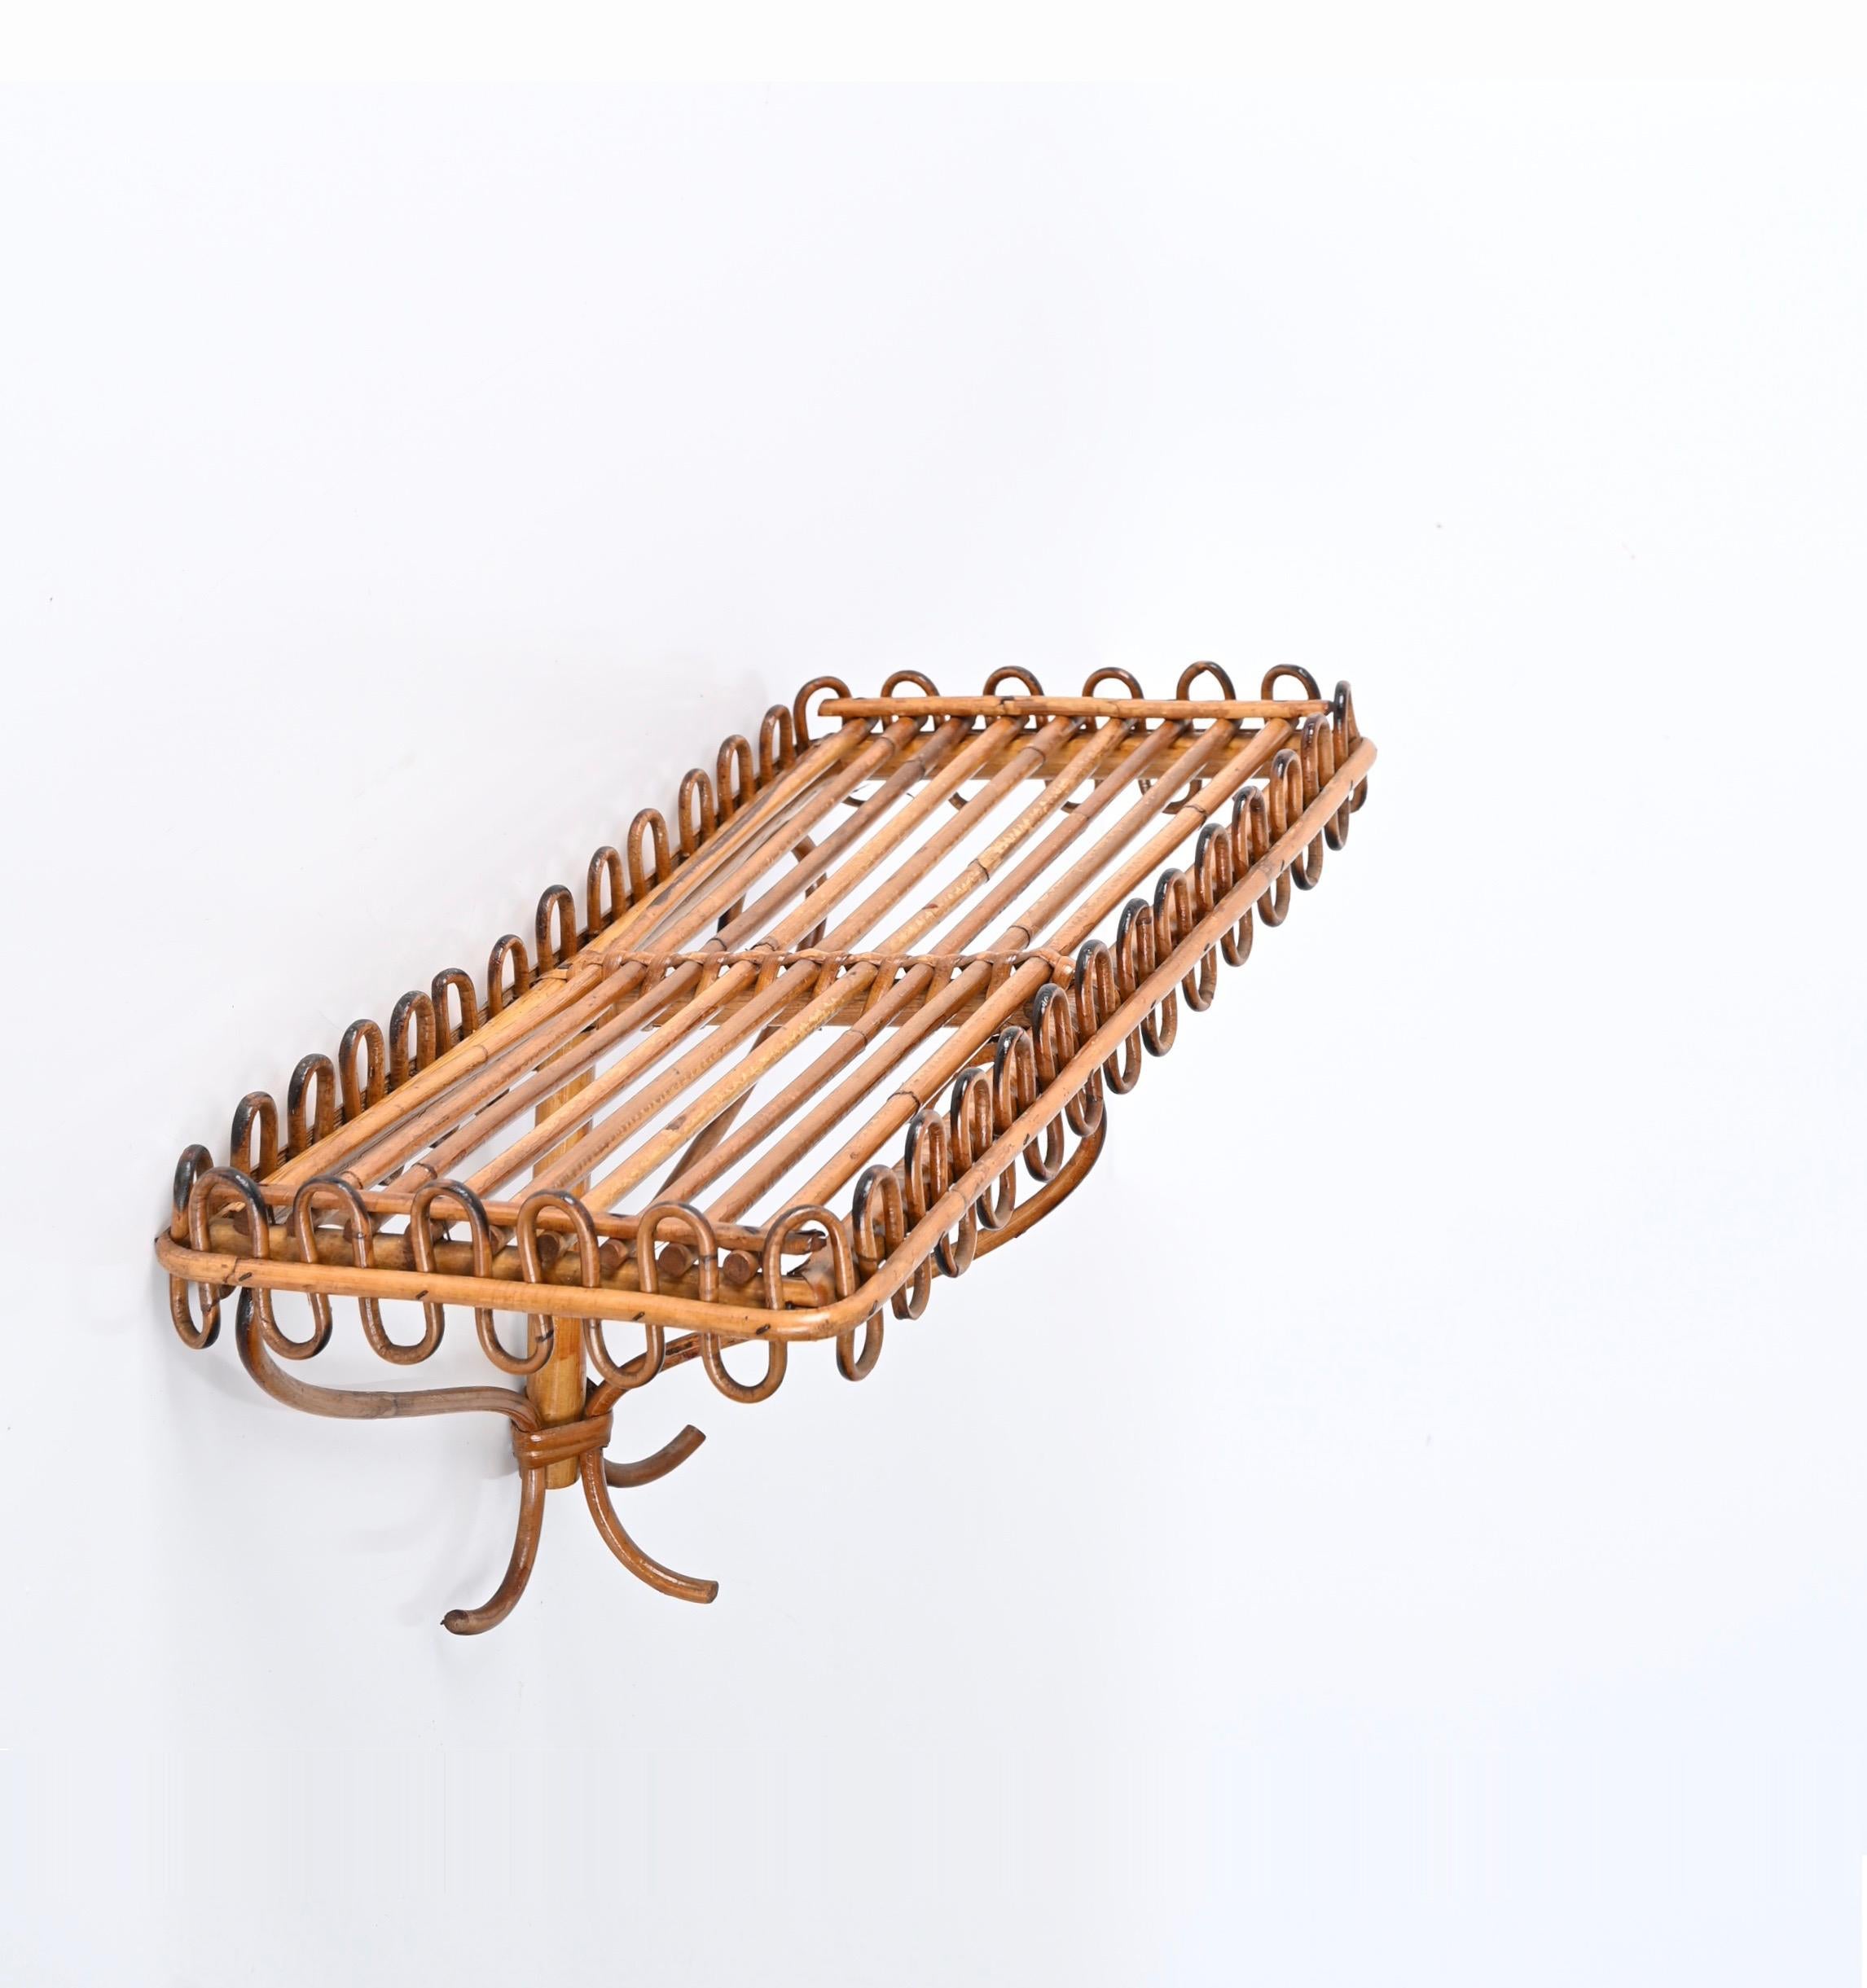 Midcentury Rattan and Bamboo Wall Shelf or Console, Franco Albini, Italy, 1960s For Sale 6